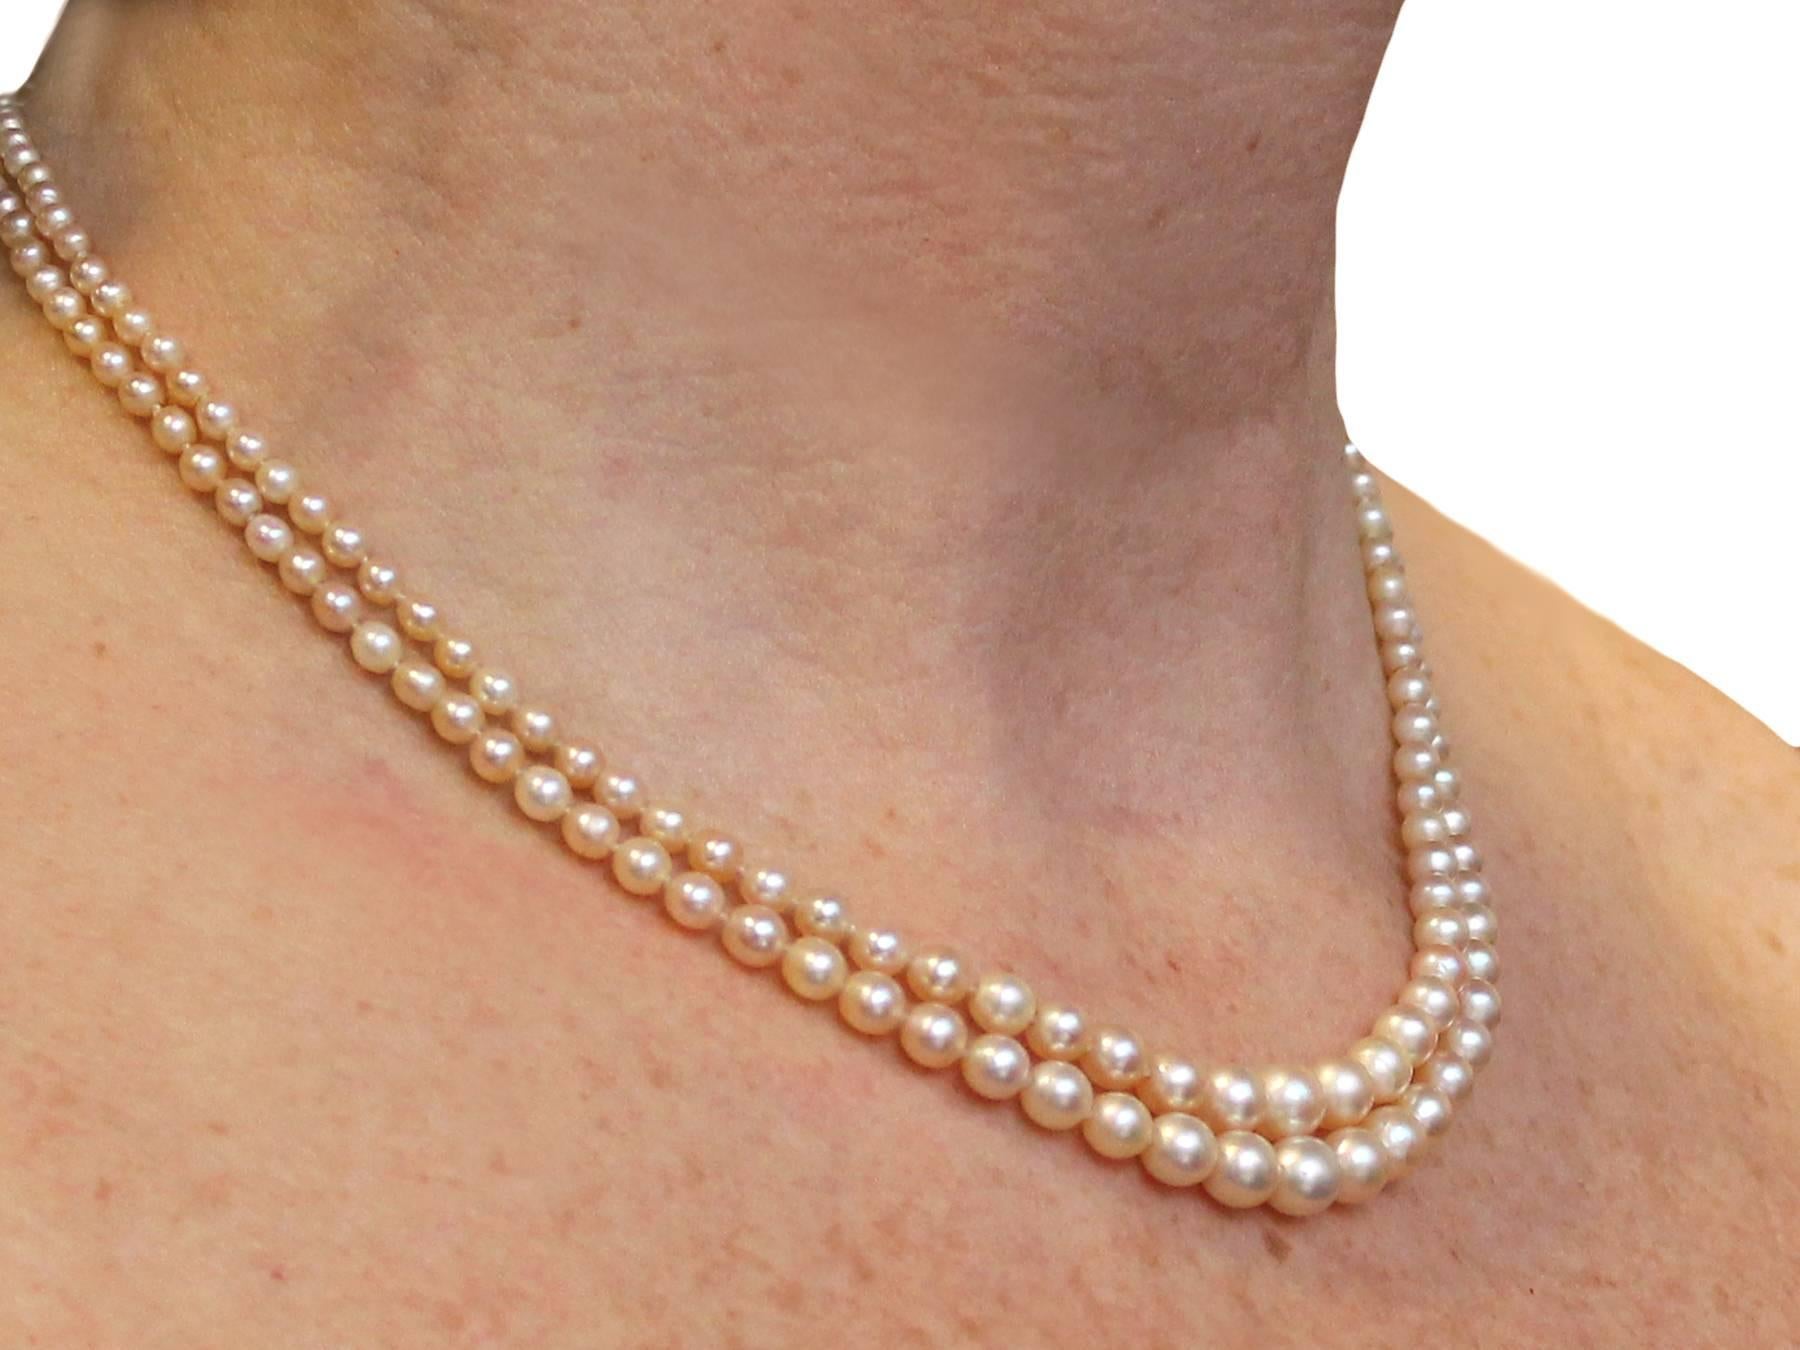 Double Strand Pearl Necklace with 0.55Ct Diamond, White Gold Clasp - Antique 1